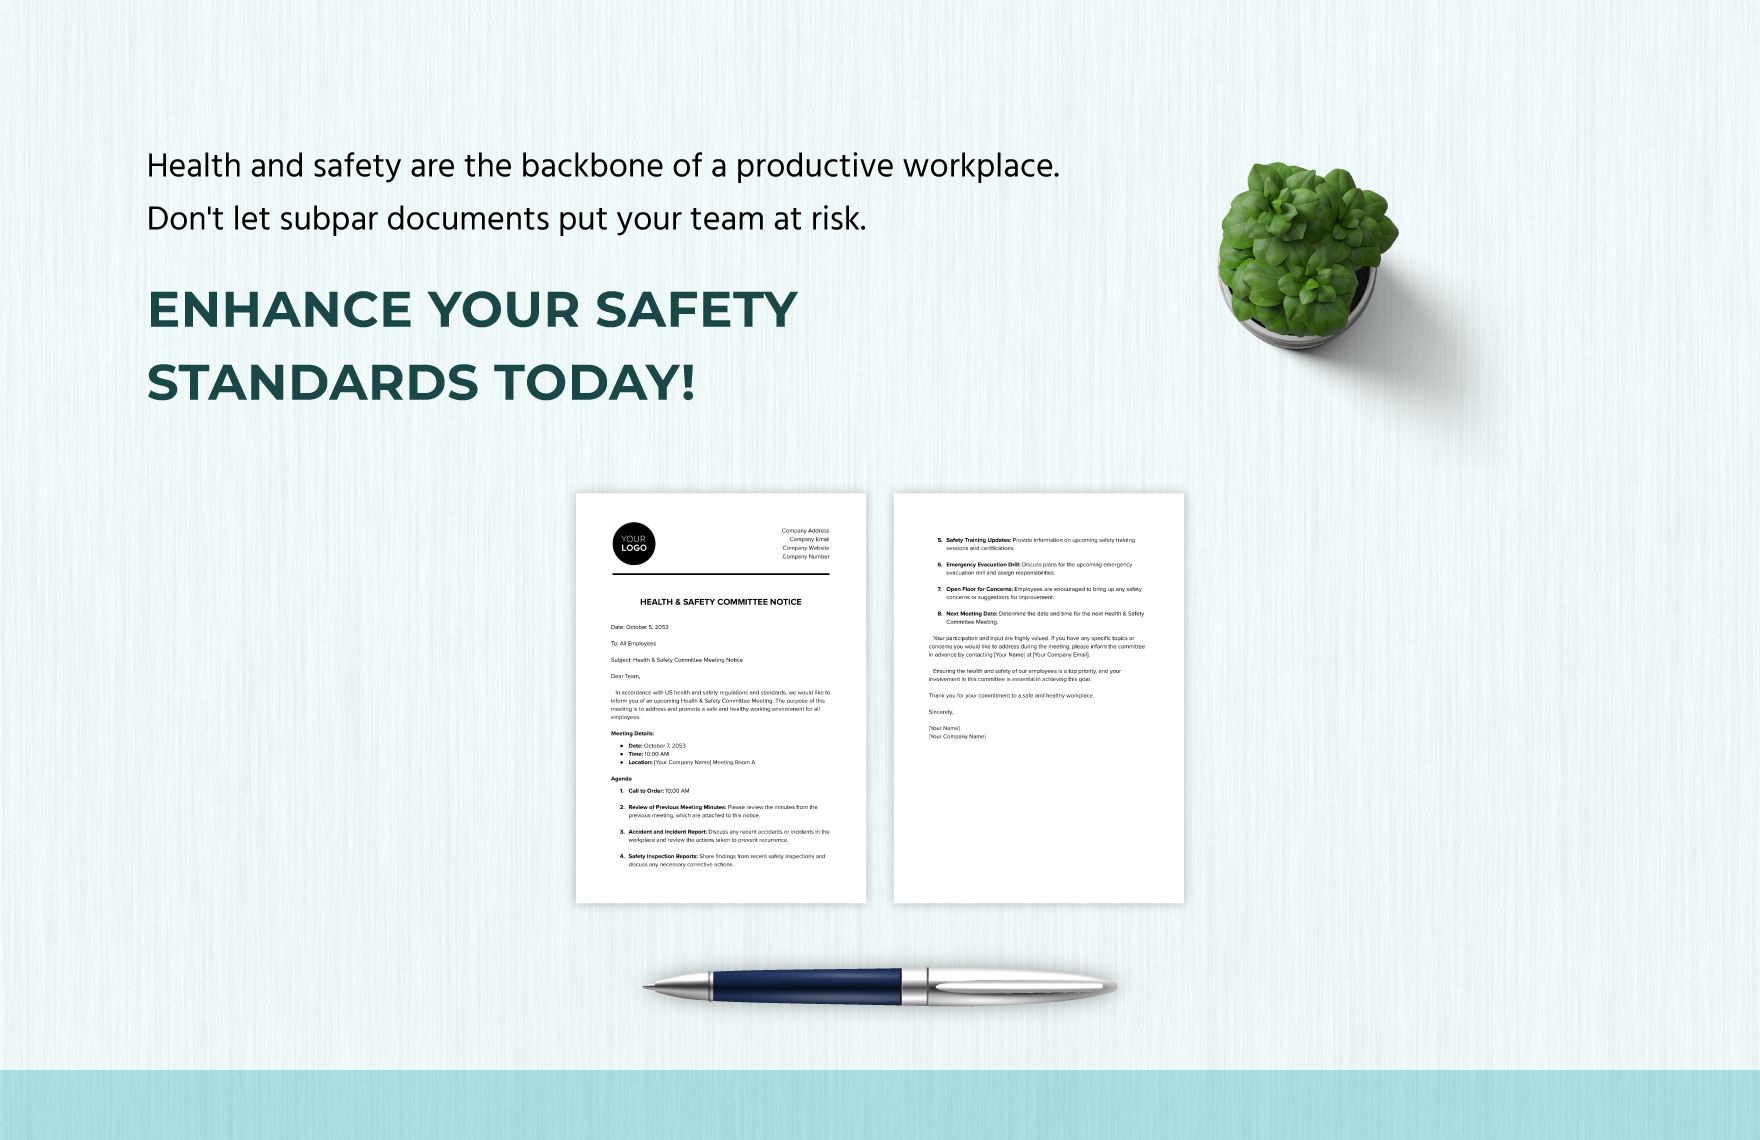 Health Safety Committee Notice Template